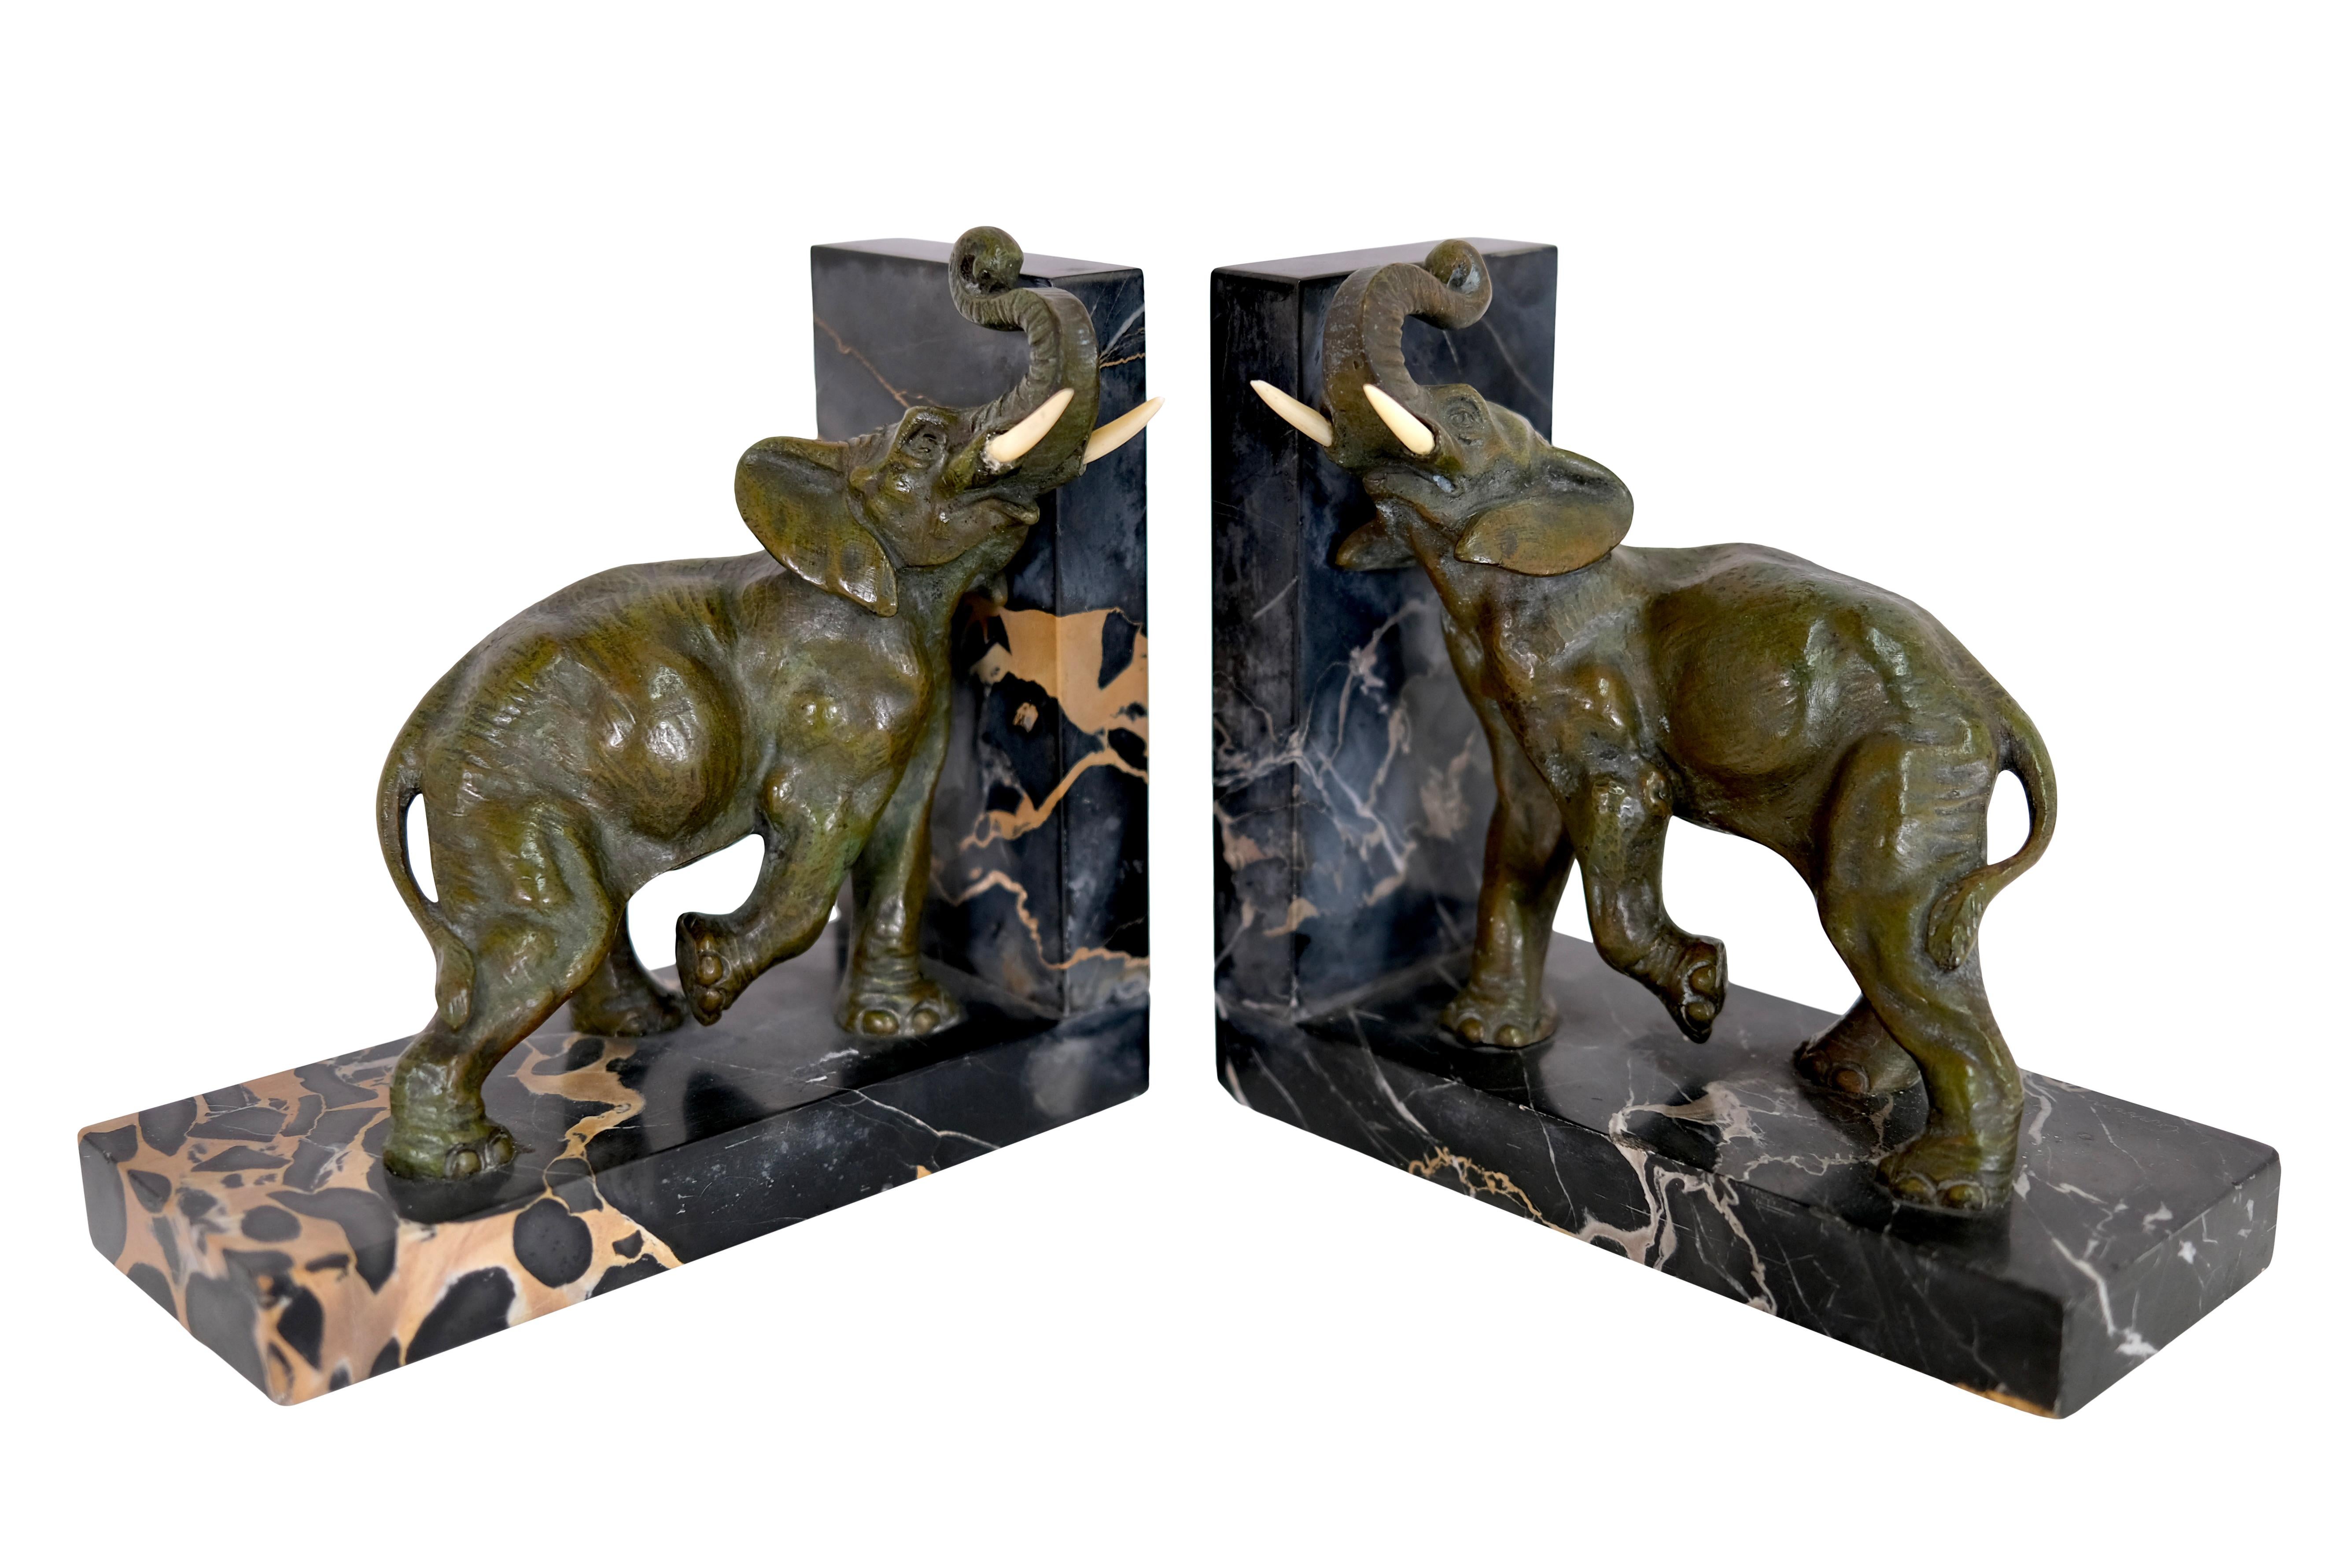 Pair of bookends by Louis-Albert Carvin
Elephants 
Bronze with original patina
Portormarble base
